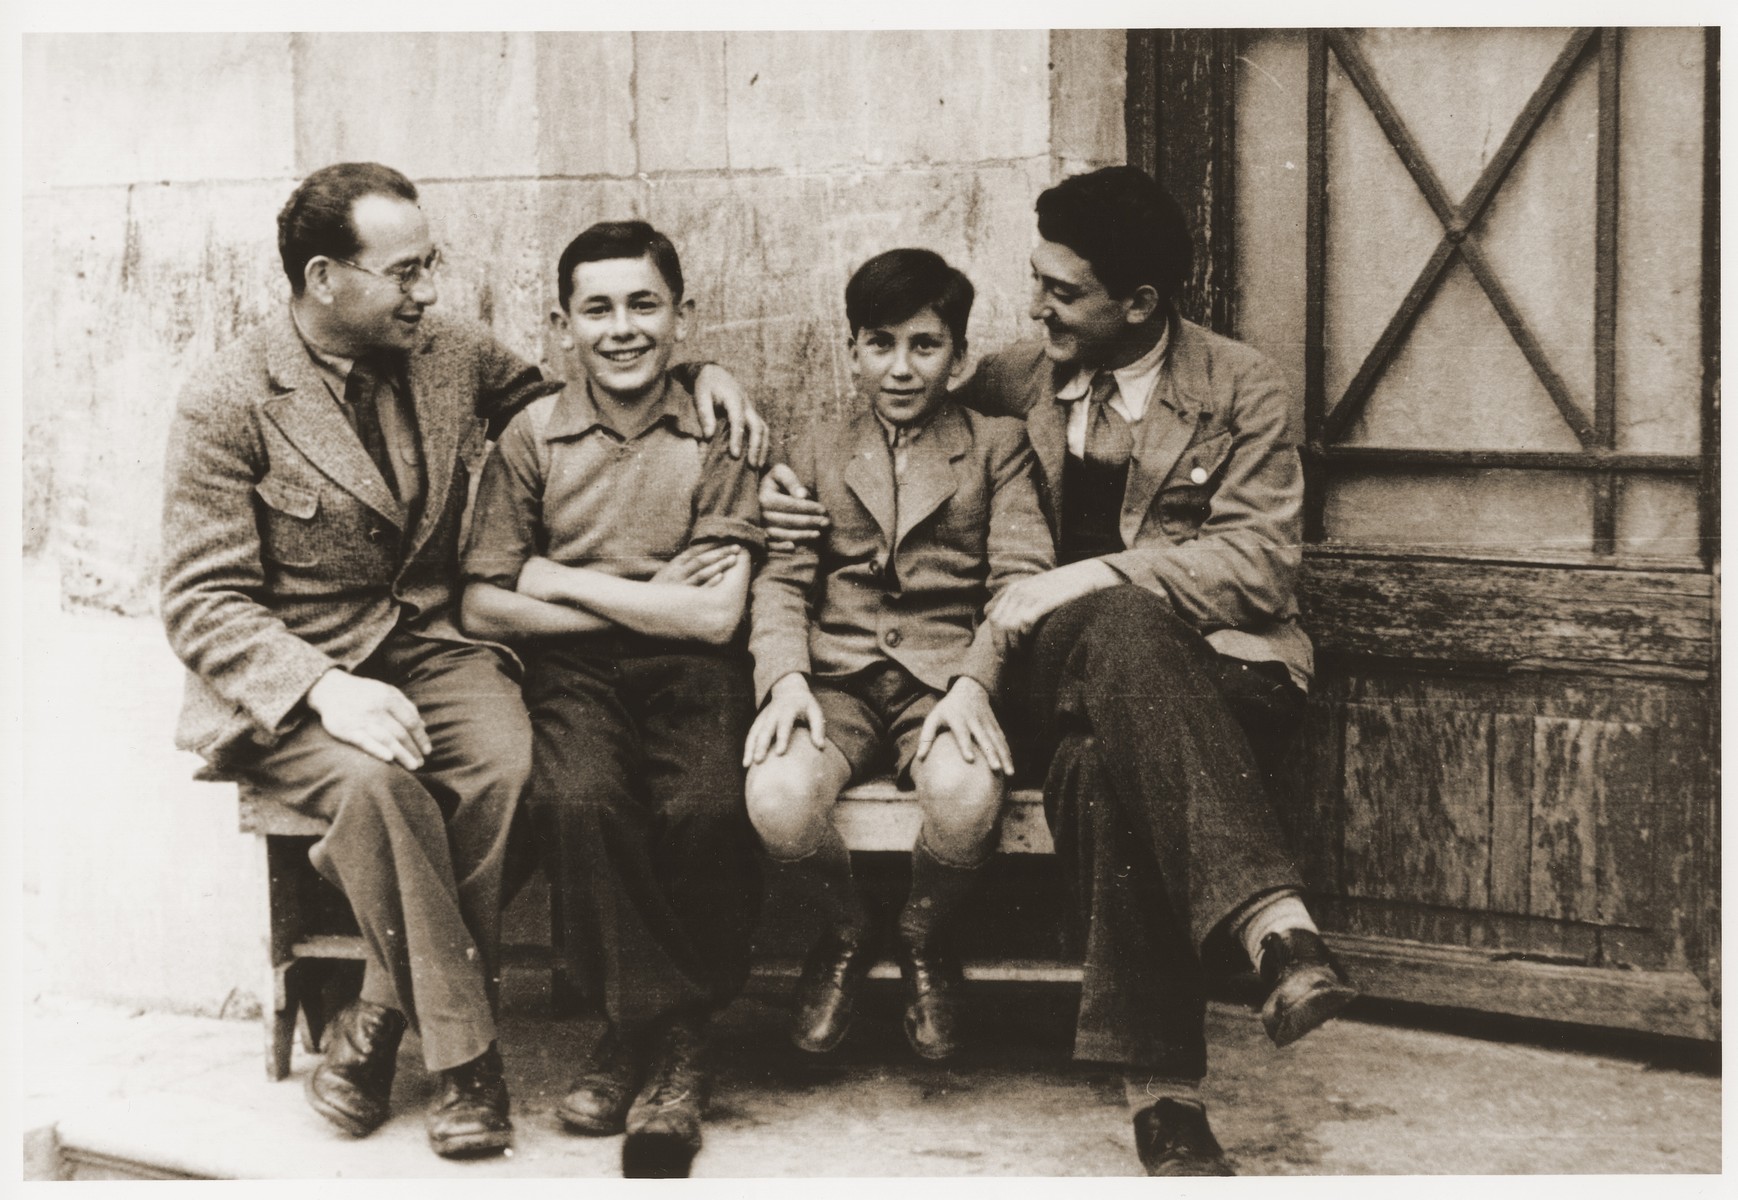 Two Jewish boys sit on a bench with their counselors at the Rothschild's Château Ferrière, where they are attending a summer camp sponsored by the OSE (Oeuvre de secours aux Enfants). 

Pictured from left to right are Manfred Reingewitz, Romek Wajsman, Salek Finkelstein and Ralph Lewin.